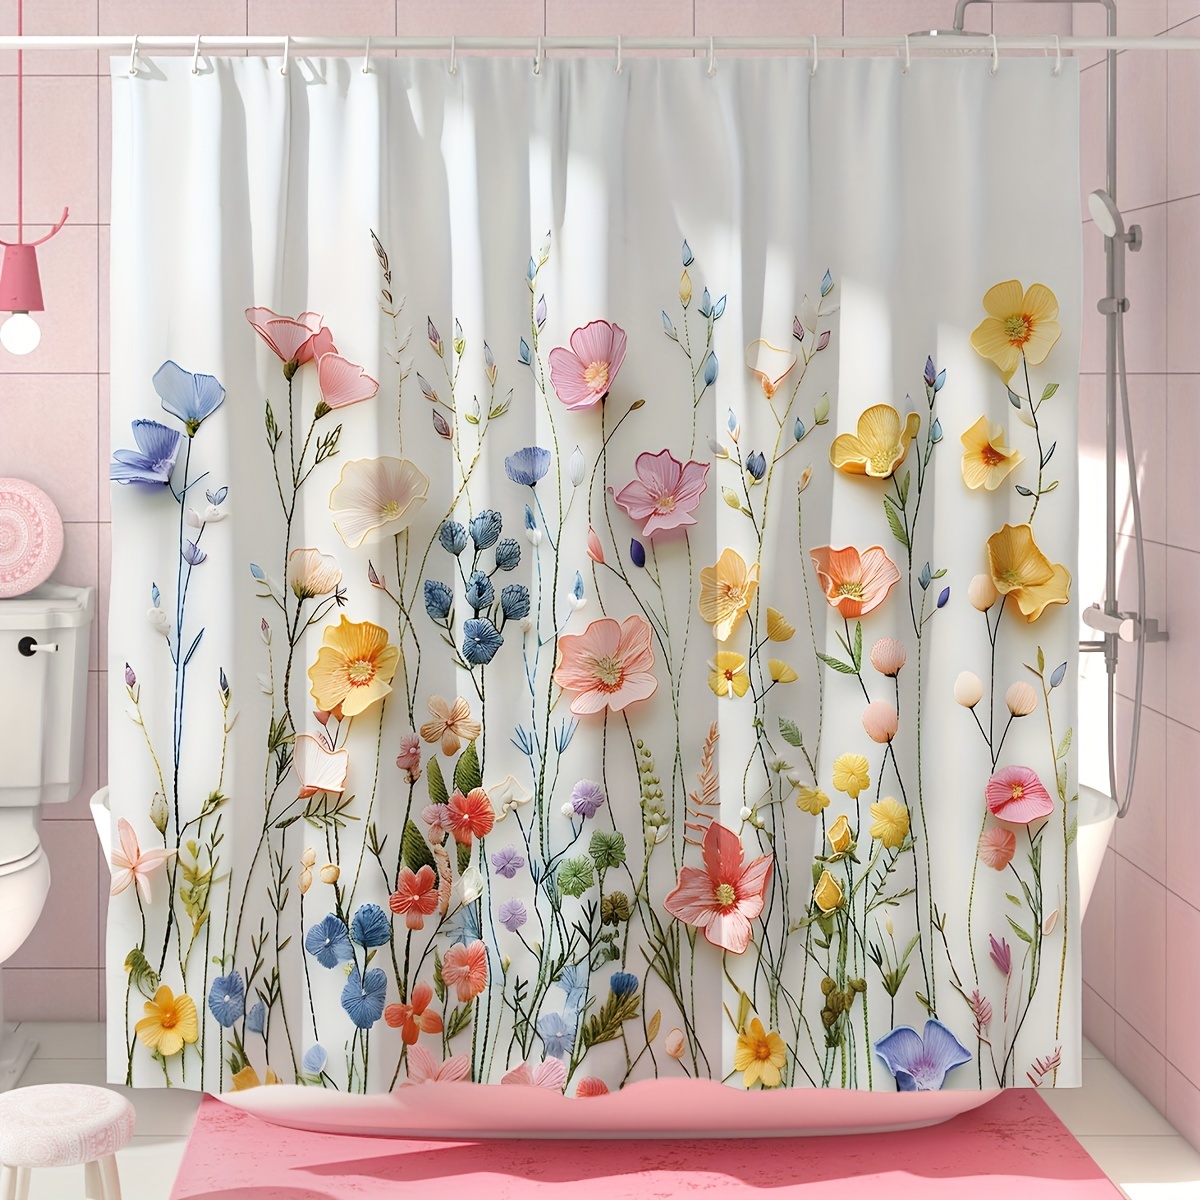 

1pc Floral Shower Curtain, Rustic Farmhouse Bathroom Decor, Waterproof Polyester Fabric, White Yellow Flowers, Machine Washable With 12 Hooks For Bathtub And Home Decoration